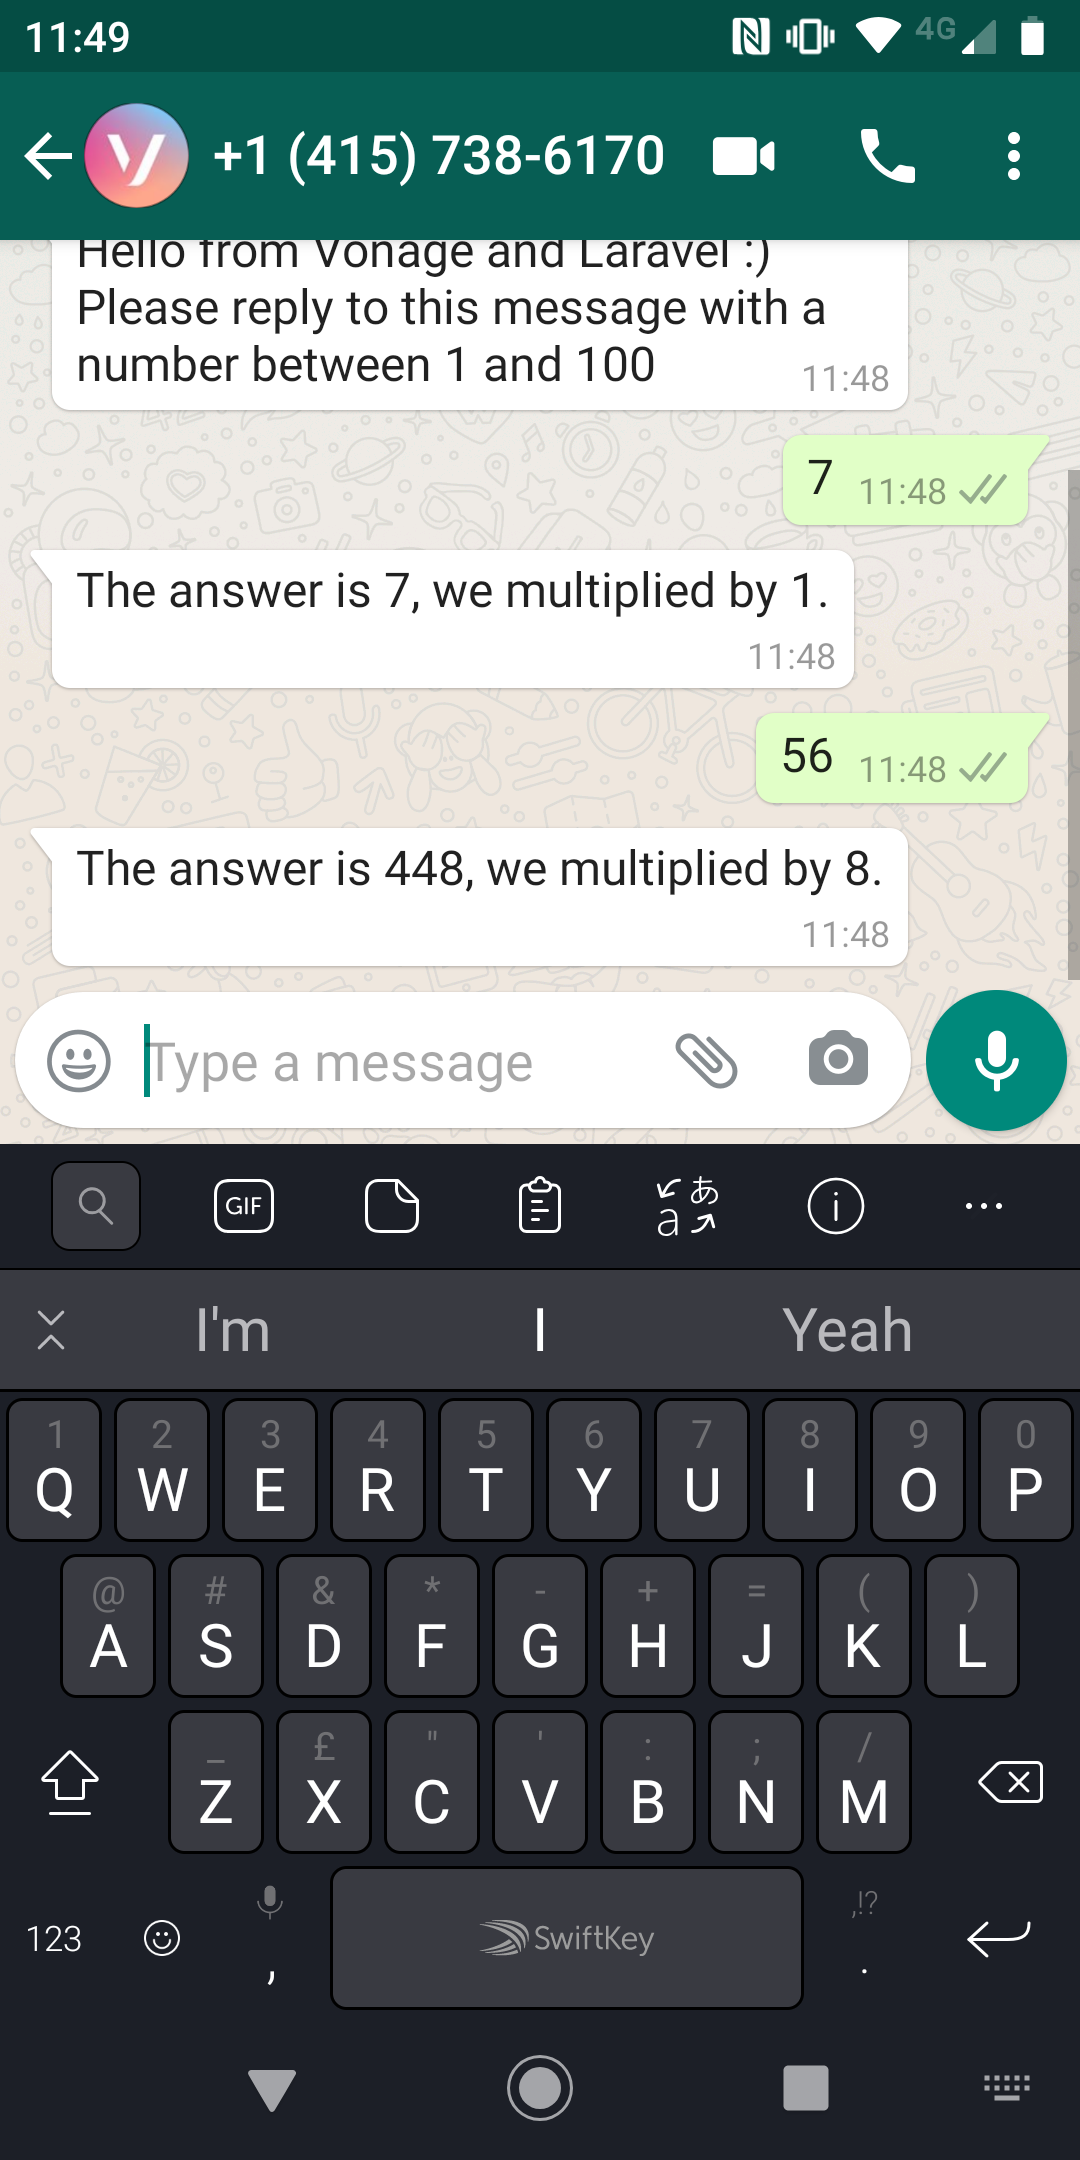 Screenshot of the messages between user and application in whatsapp on a mobile phone